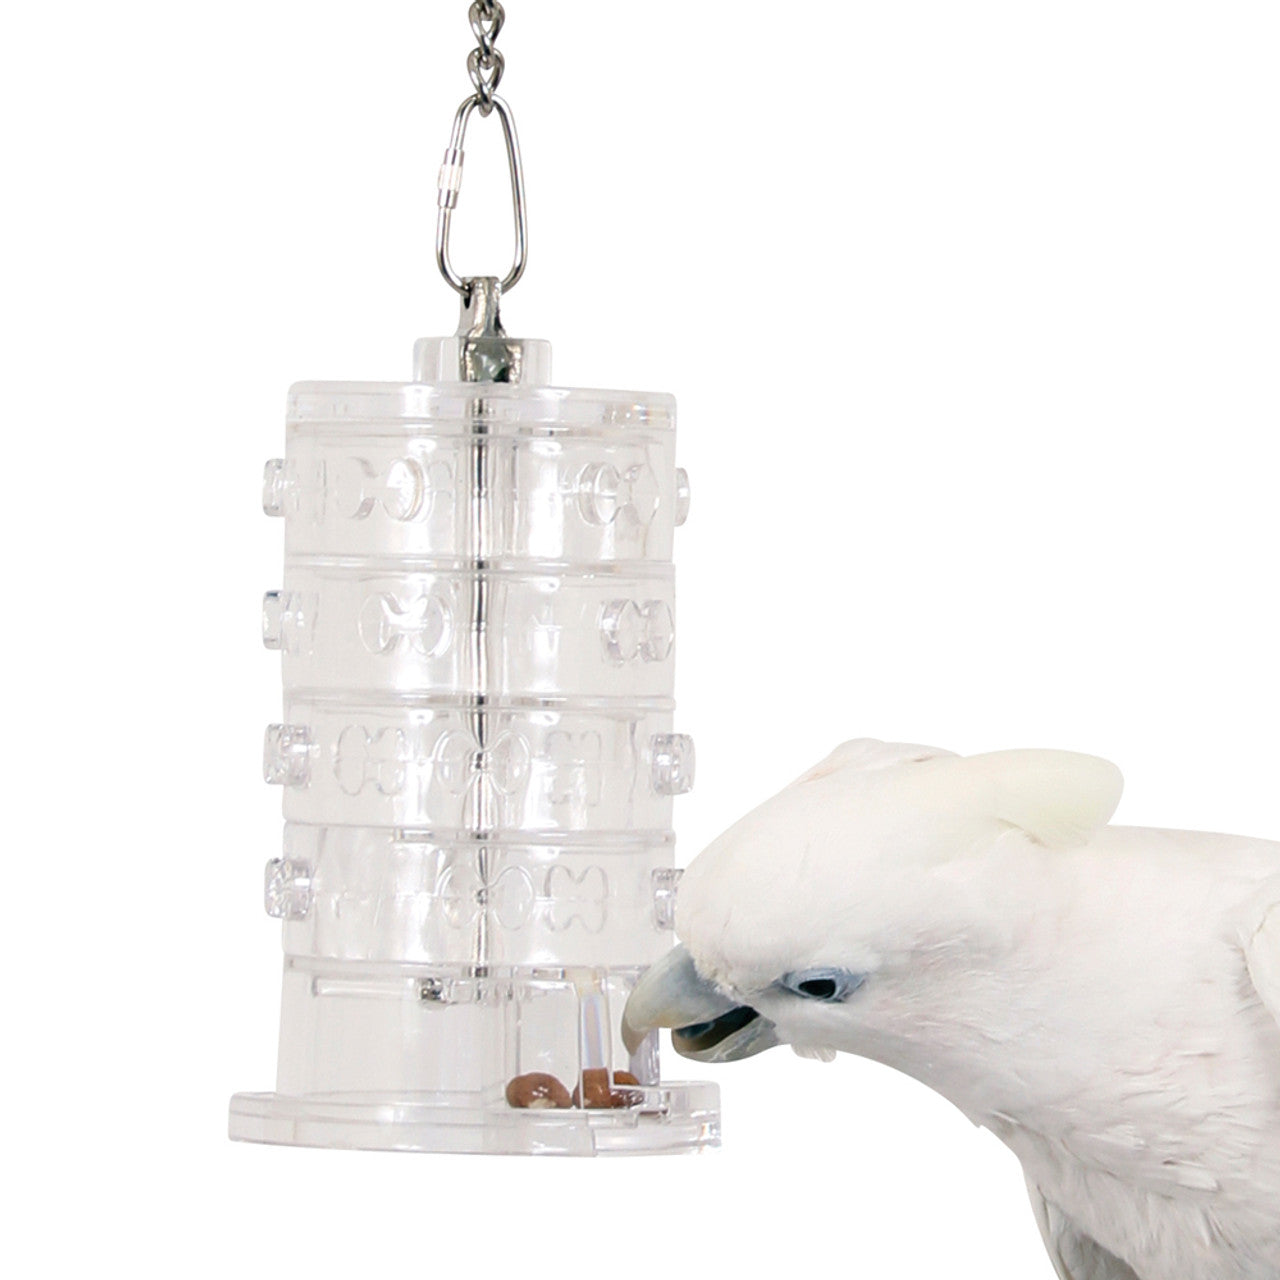 Rings of Fortune - Advanced Foraging Toy for Parrots